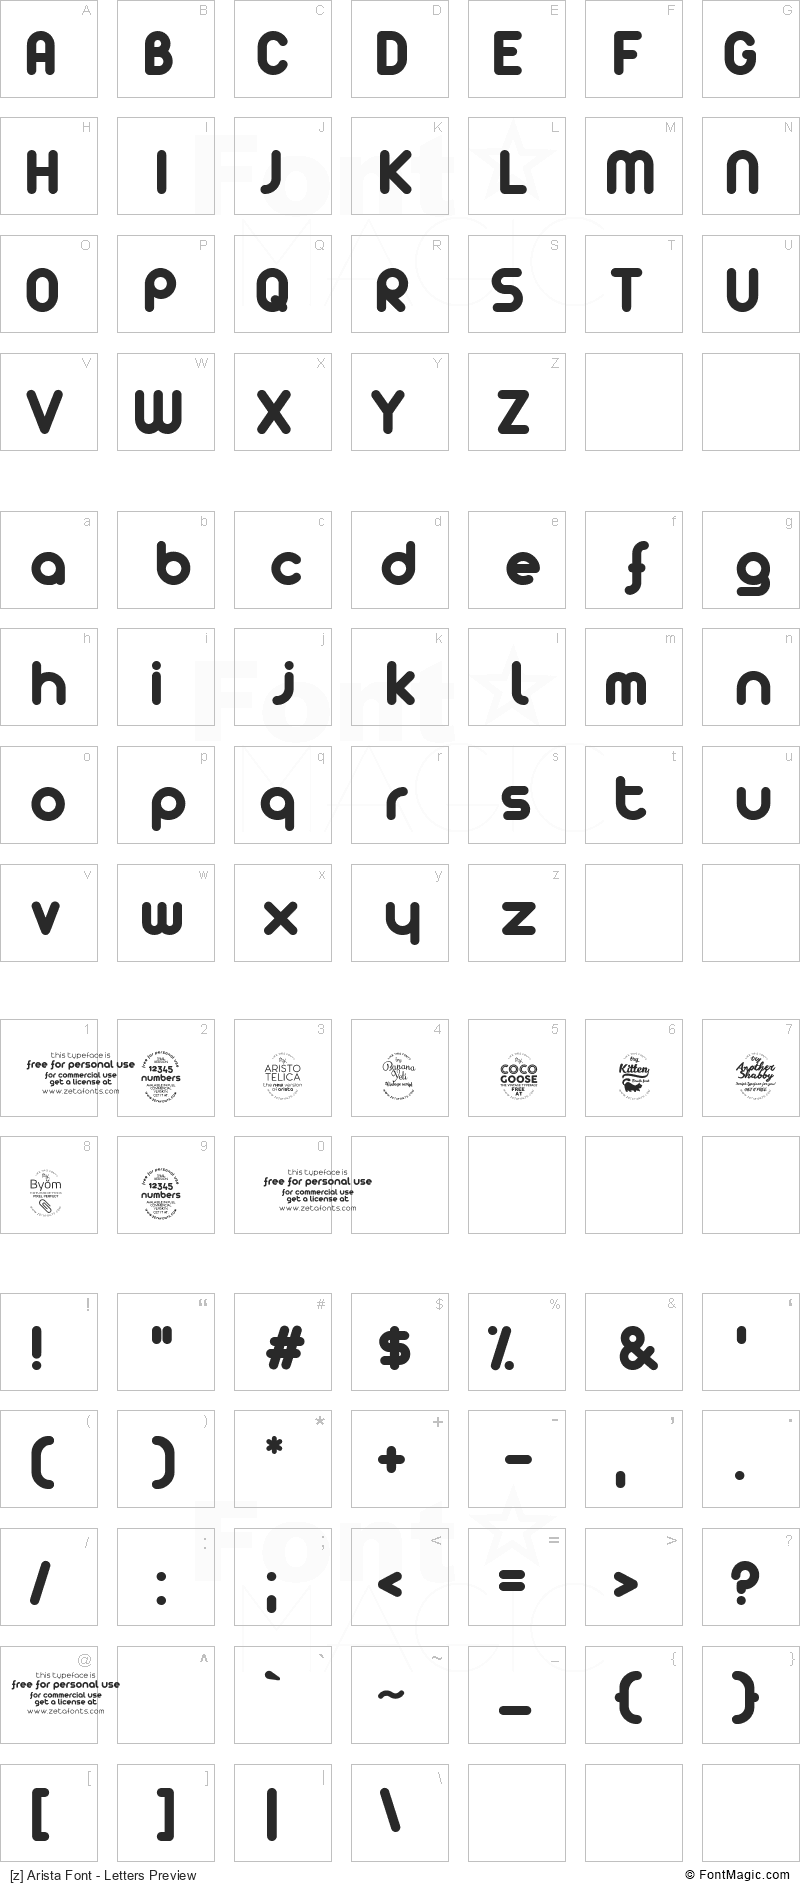 [z] Arista Font - All Latters Preview Chart